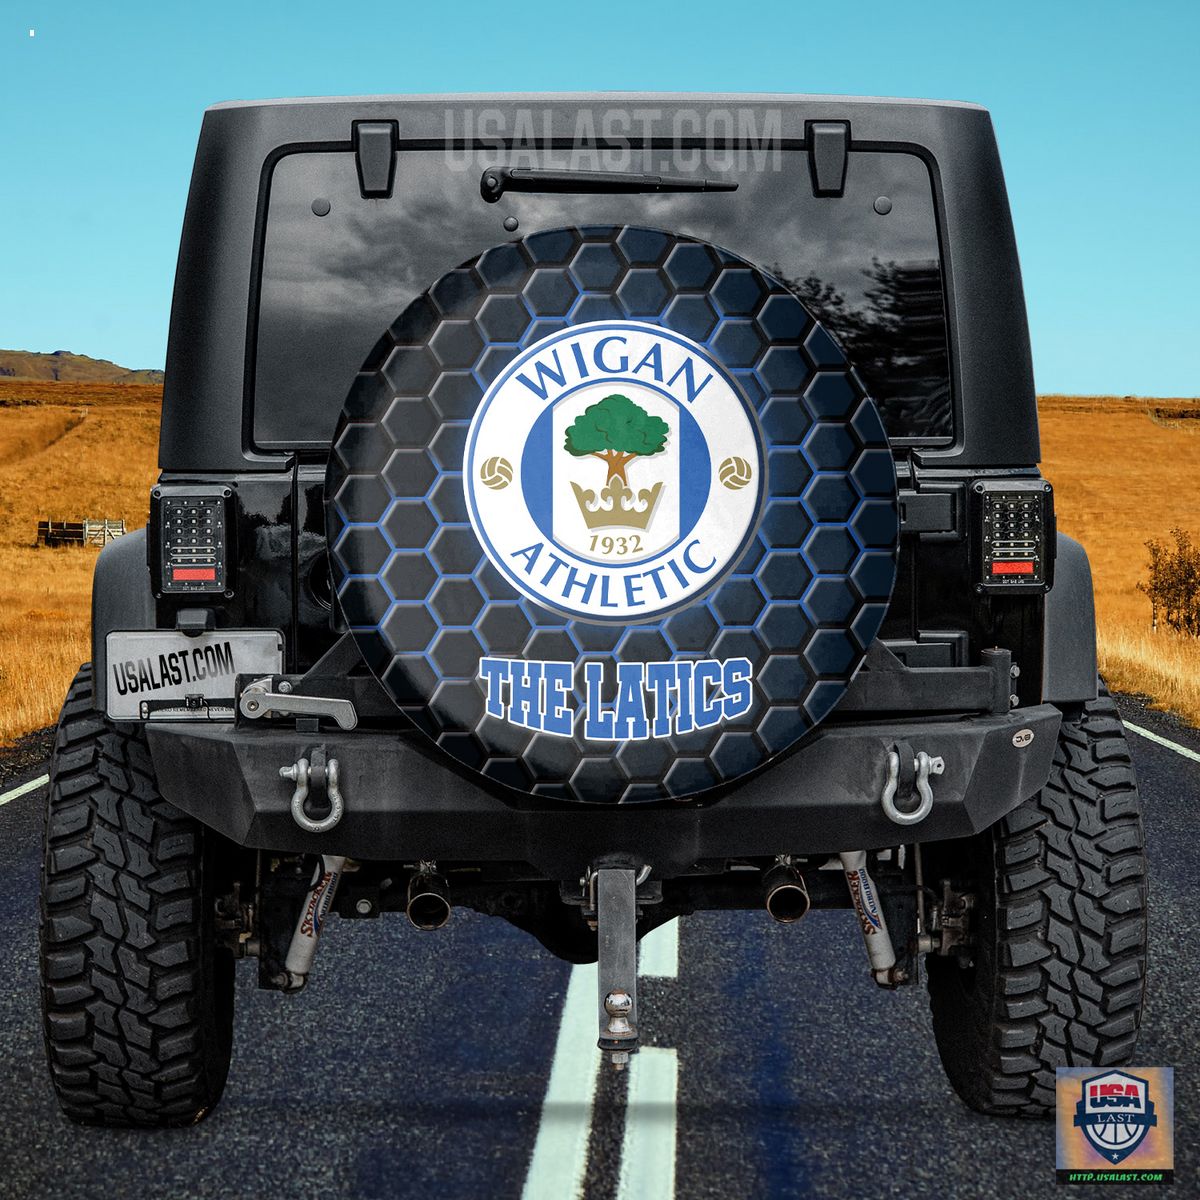 AMAZING Wigan Athletic FC Spare Tire Cover